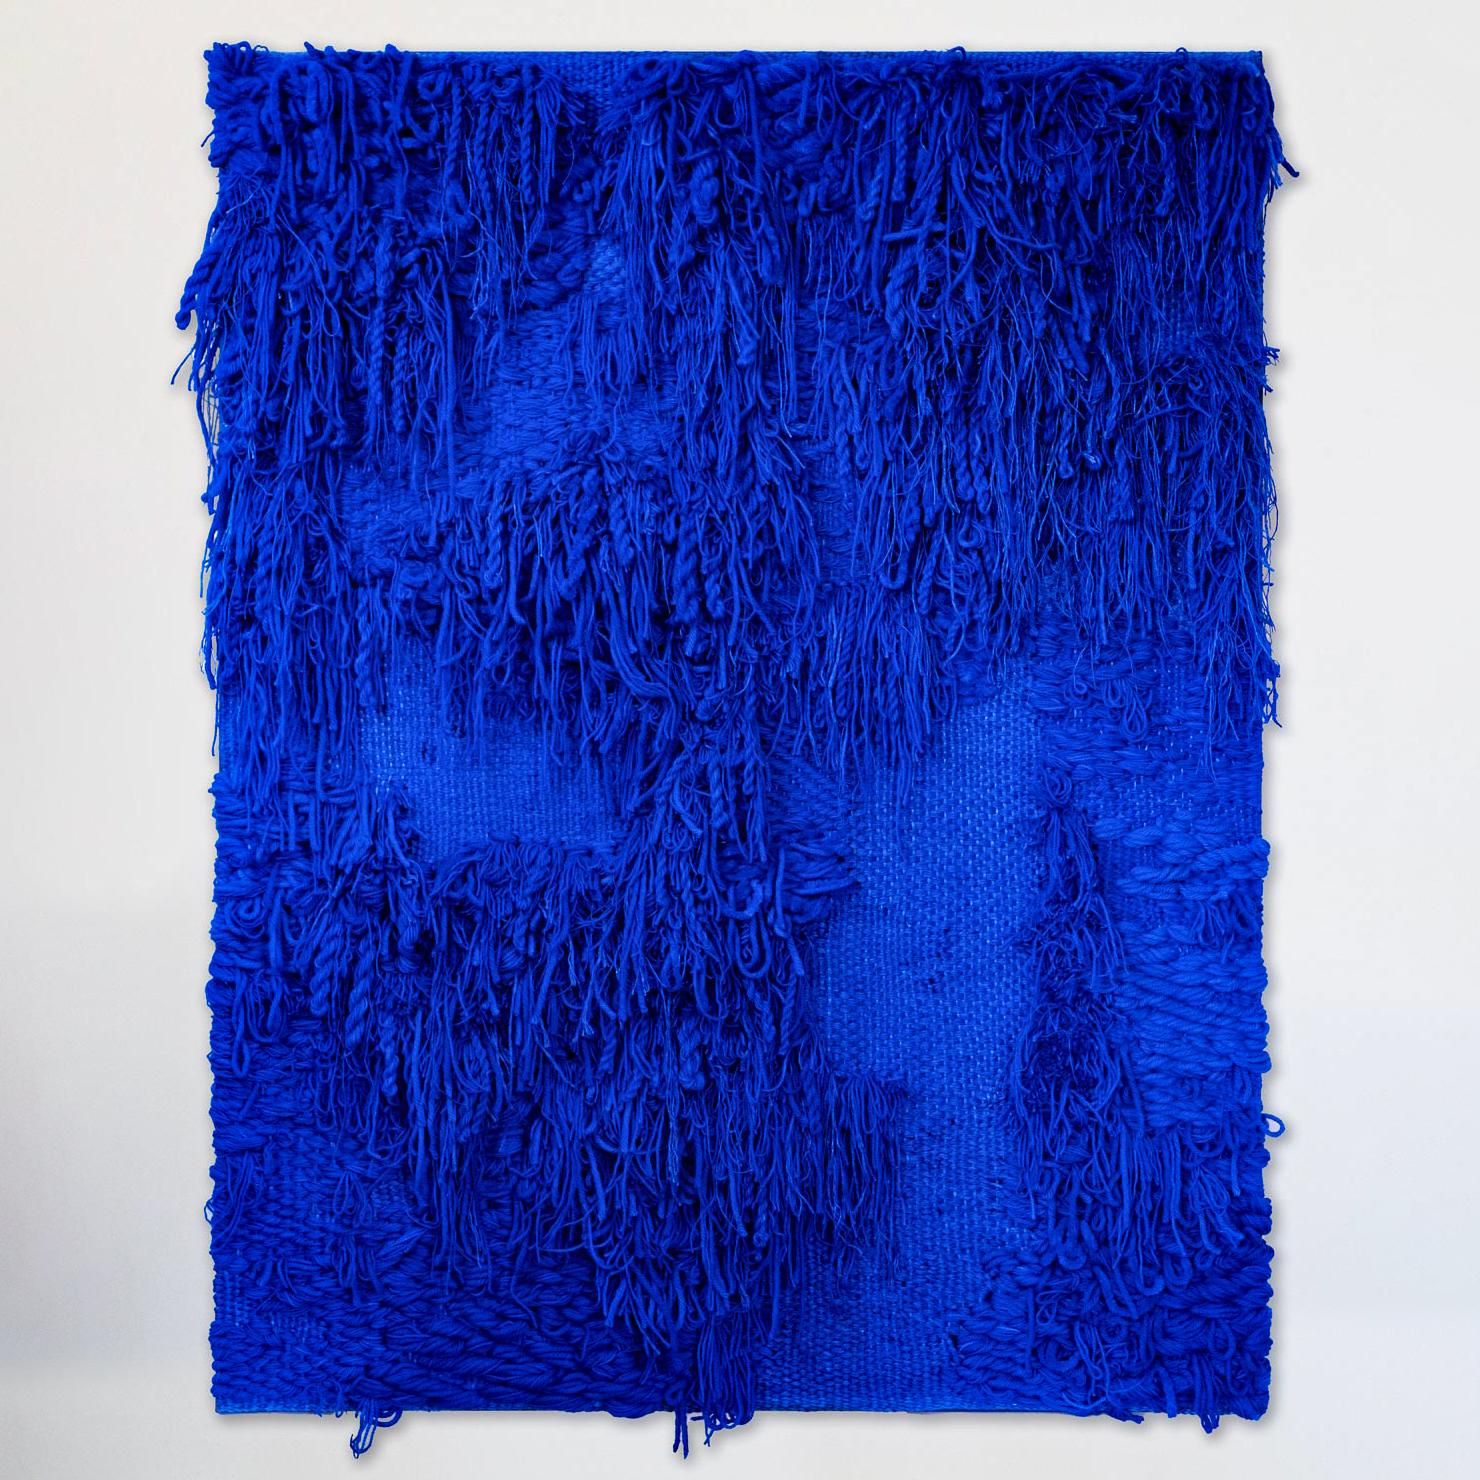 Title: BLUE II, Katja Beckman (b. 1990, Sweden)

This handwoven tapestry is complex, tactile and rich in color. The composition is made using various techniques and materials such as dyed linen, wool and artificial hair. 

Born in Skara, Sweden,